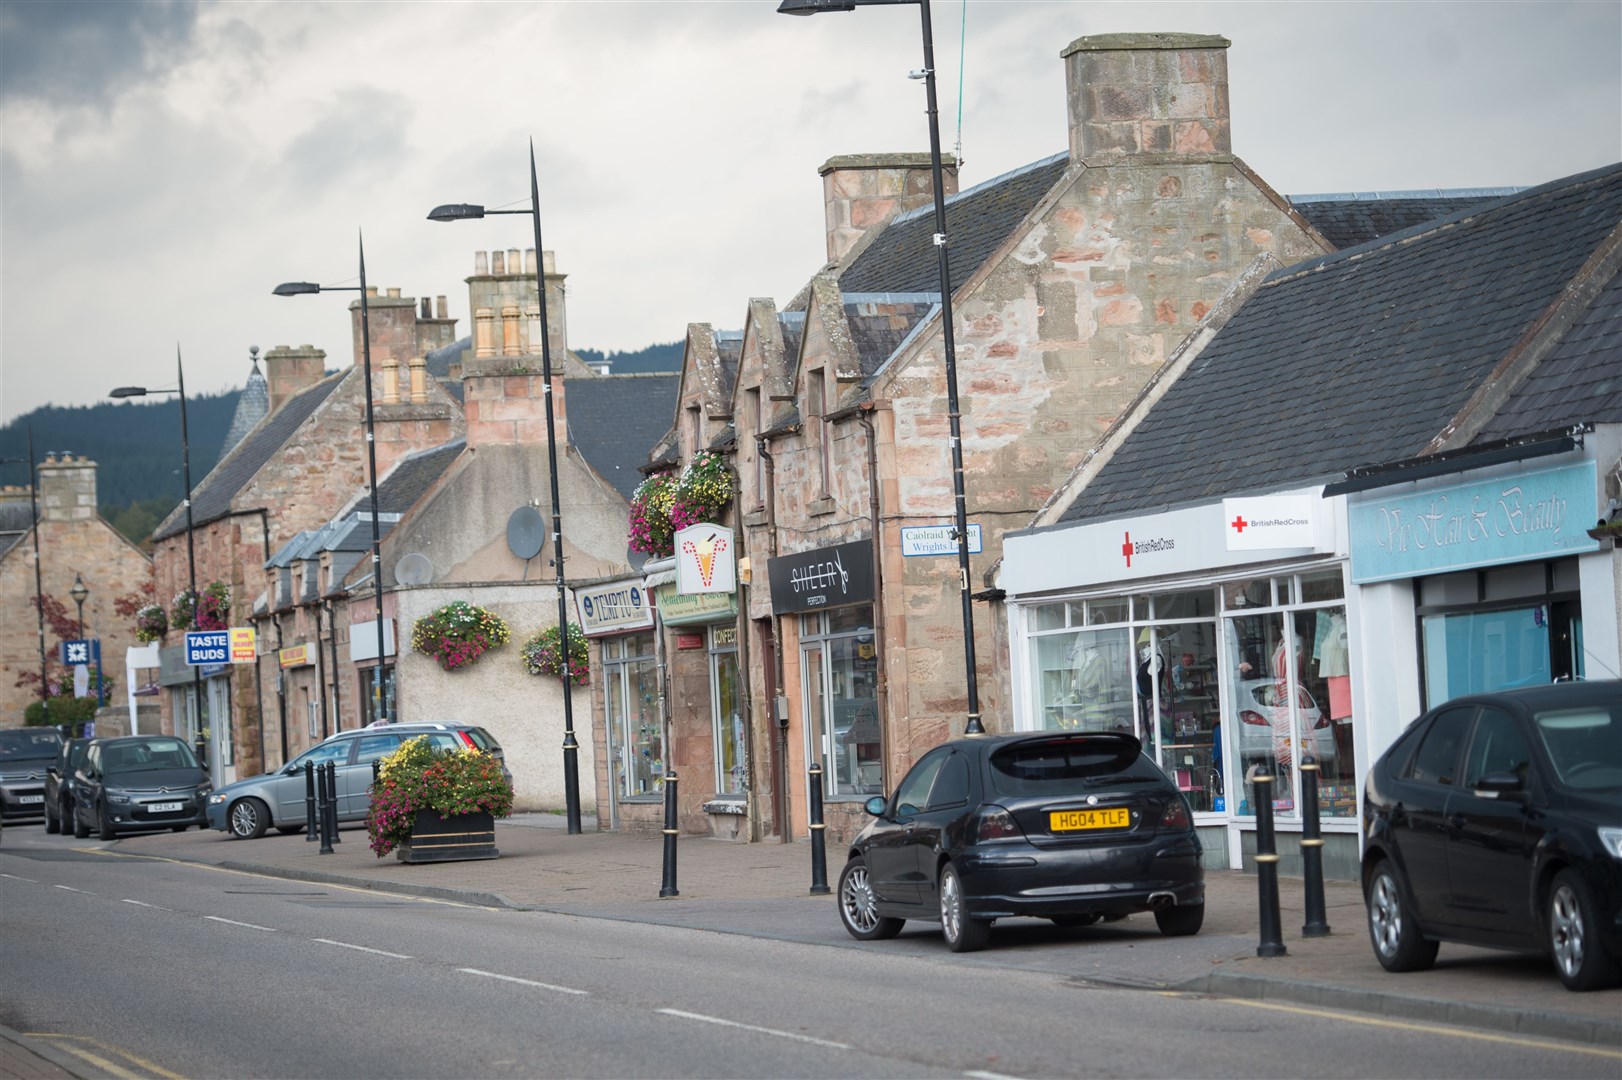 A new locality plan is being drawn up for Alness with input from the public invited.